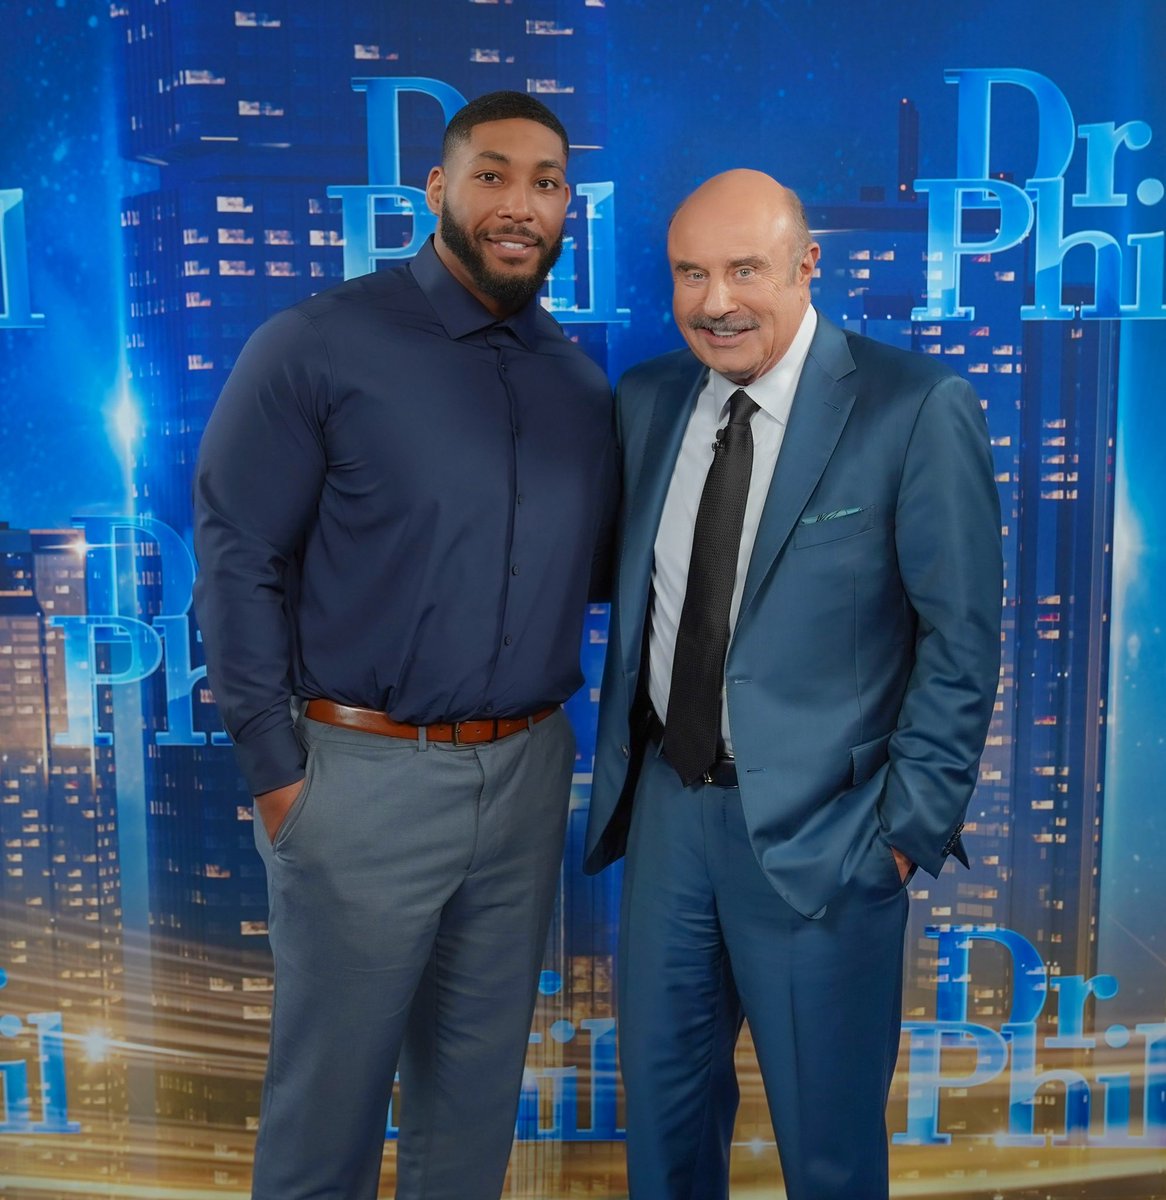 One of the most valuable pieces of advice I’ve ever received was to never seek success. Instead, seek to become a person of value by developing and refining your gifts and success will come looking for you. Thanks @drphil for providing me a platform to share my gift and wisdom.